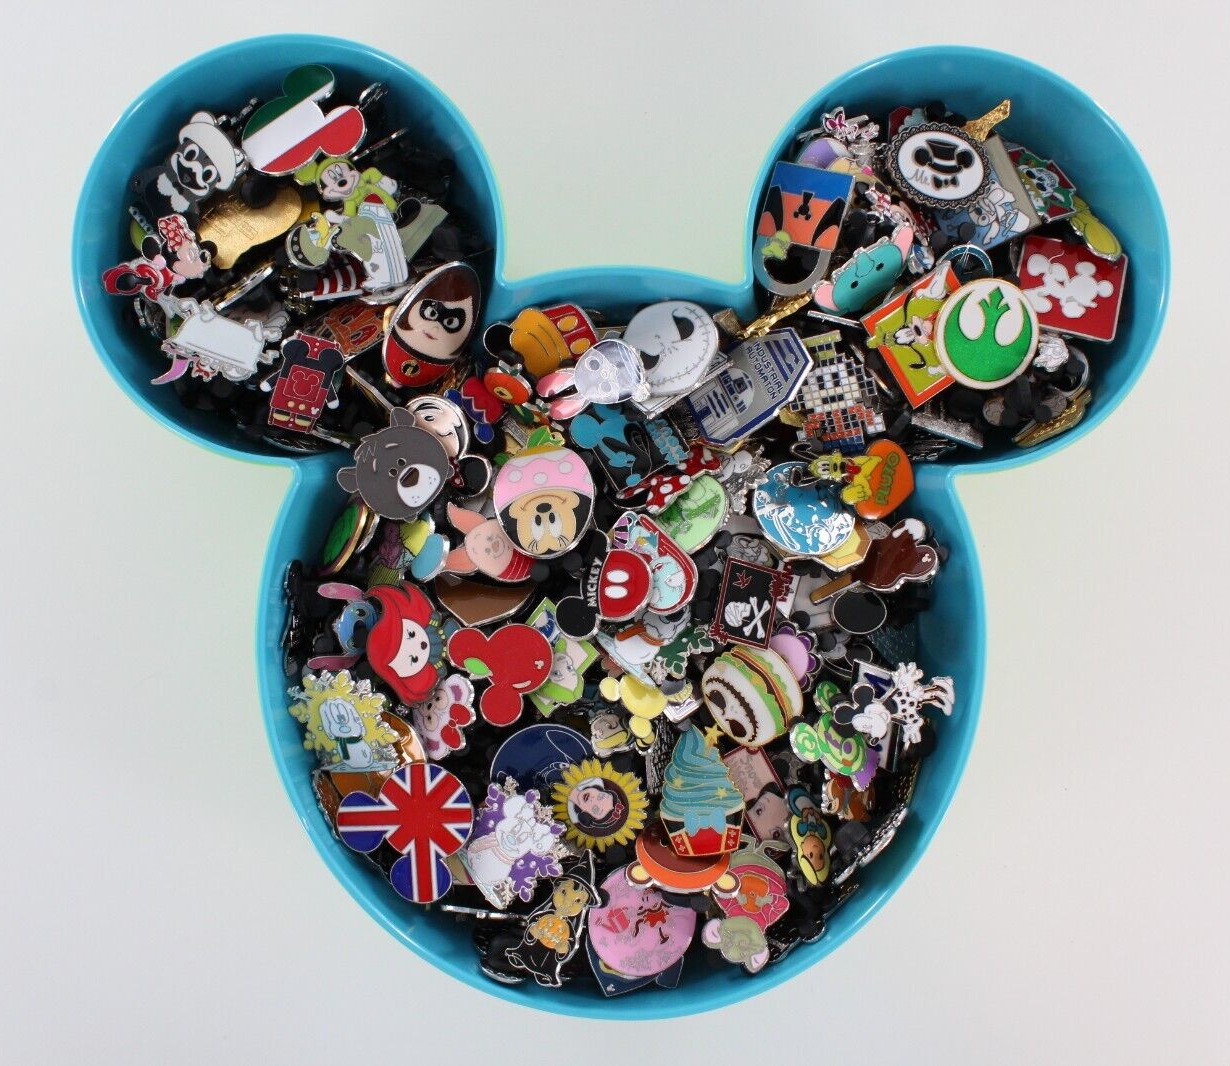 Disney Pins Lot You Pick Size From 1-500 Up to 500 pieces with NO